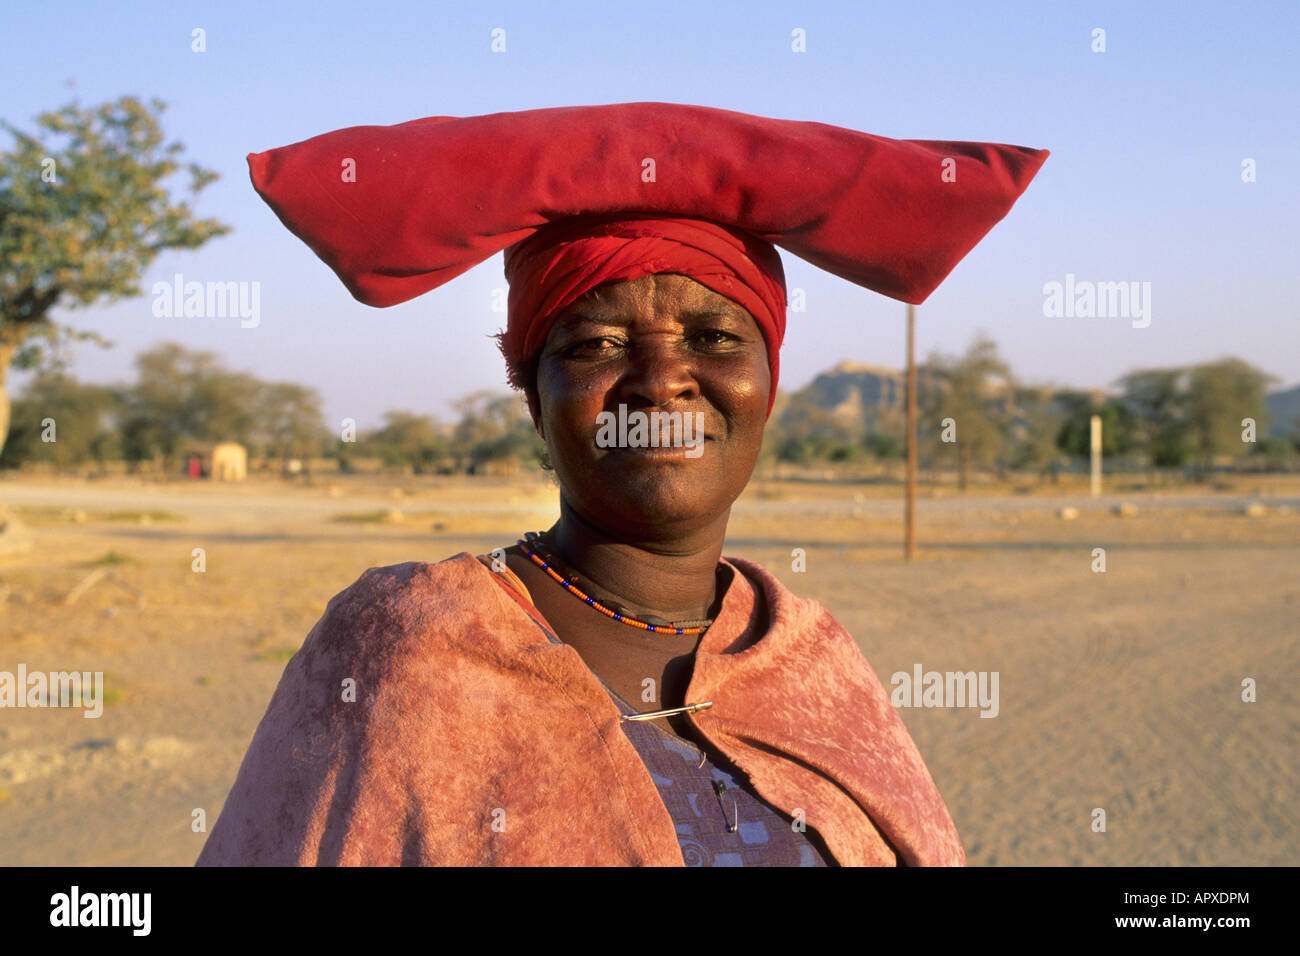 A close-up portrait of a Herero woman Stock Photo